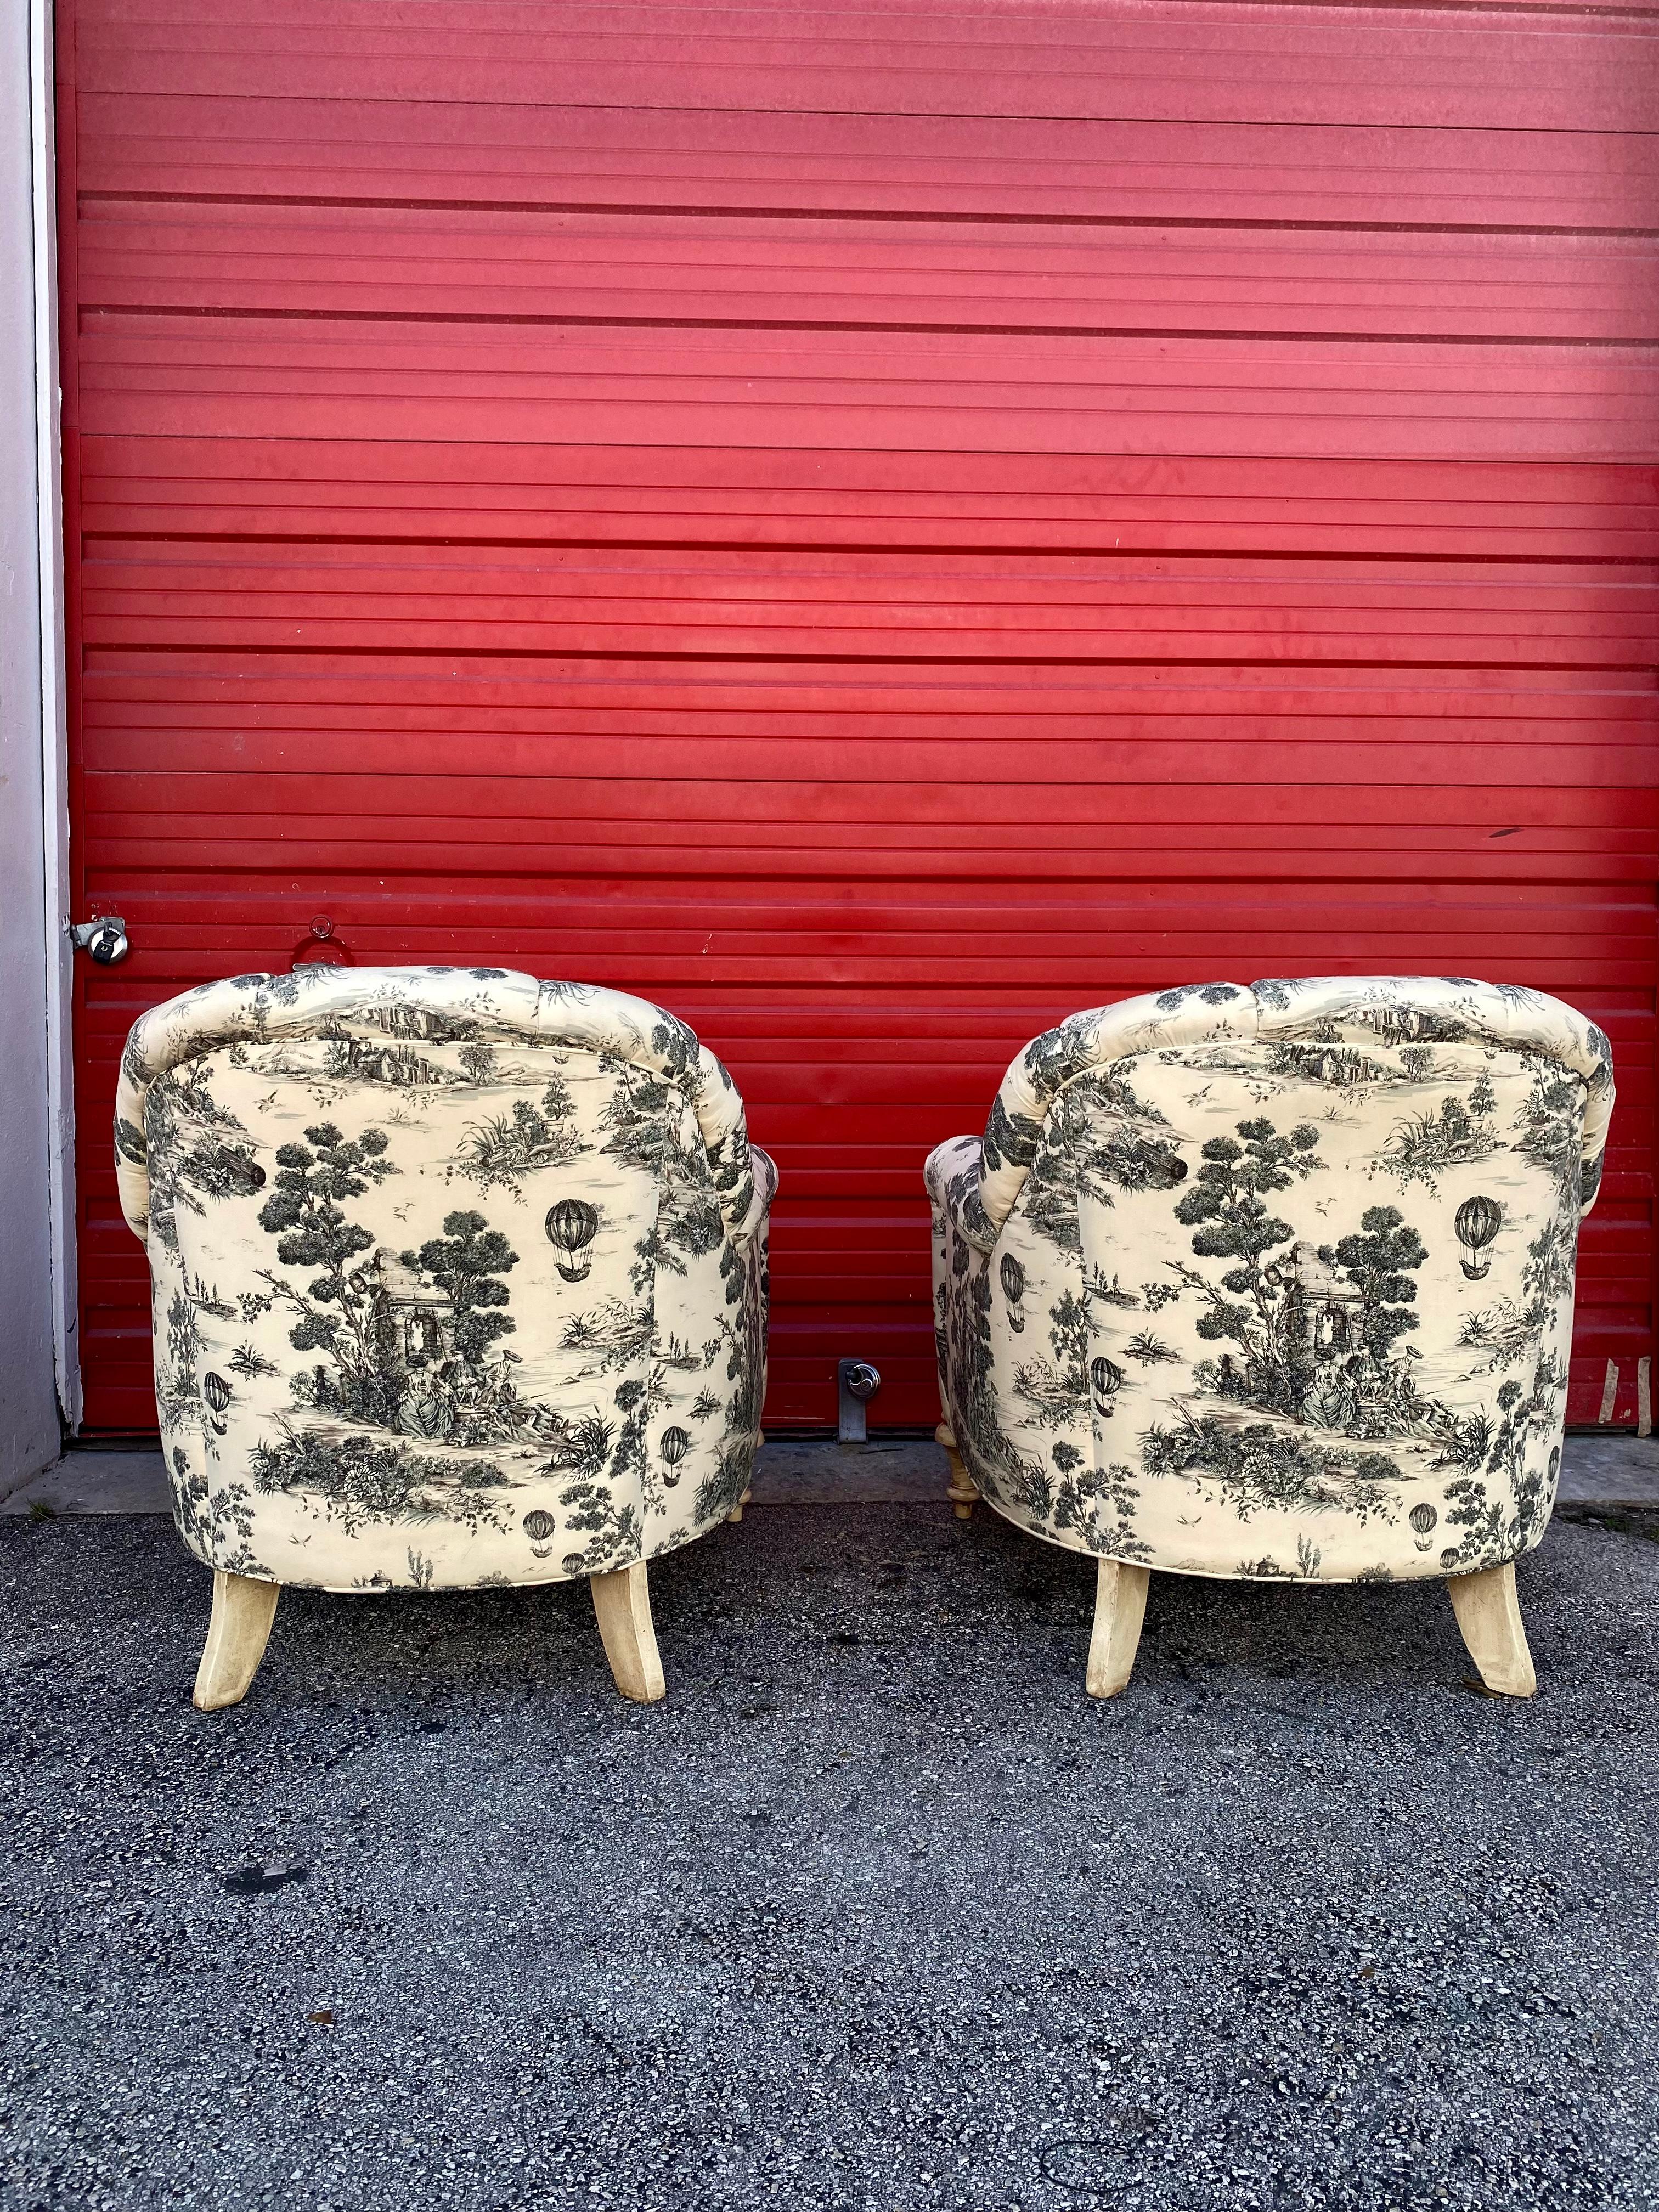 C.R. Laine Chinoiserie Tufted English Arm Chairs, Set of 2 In Excellent Condition For Sale In Fort Lauderdale, FL